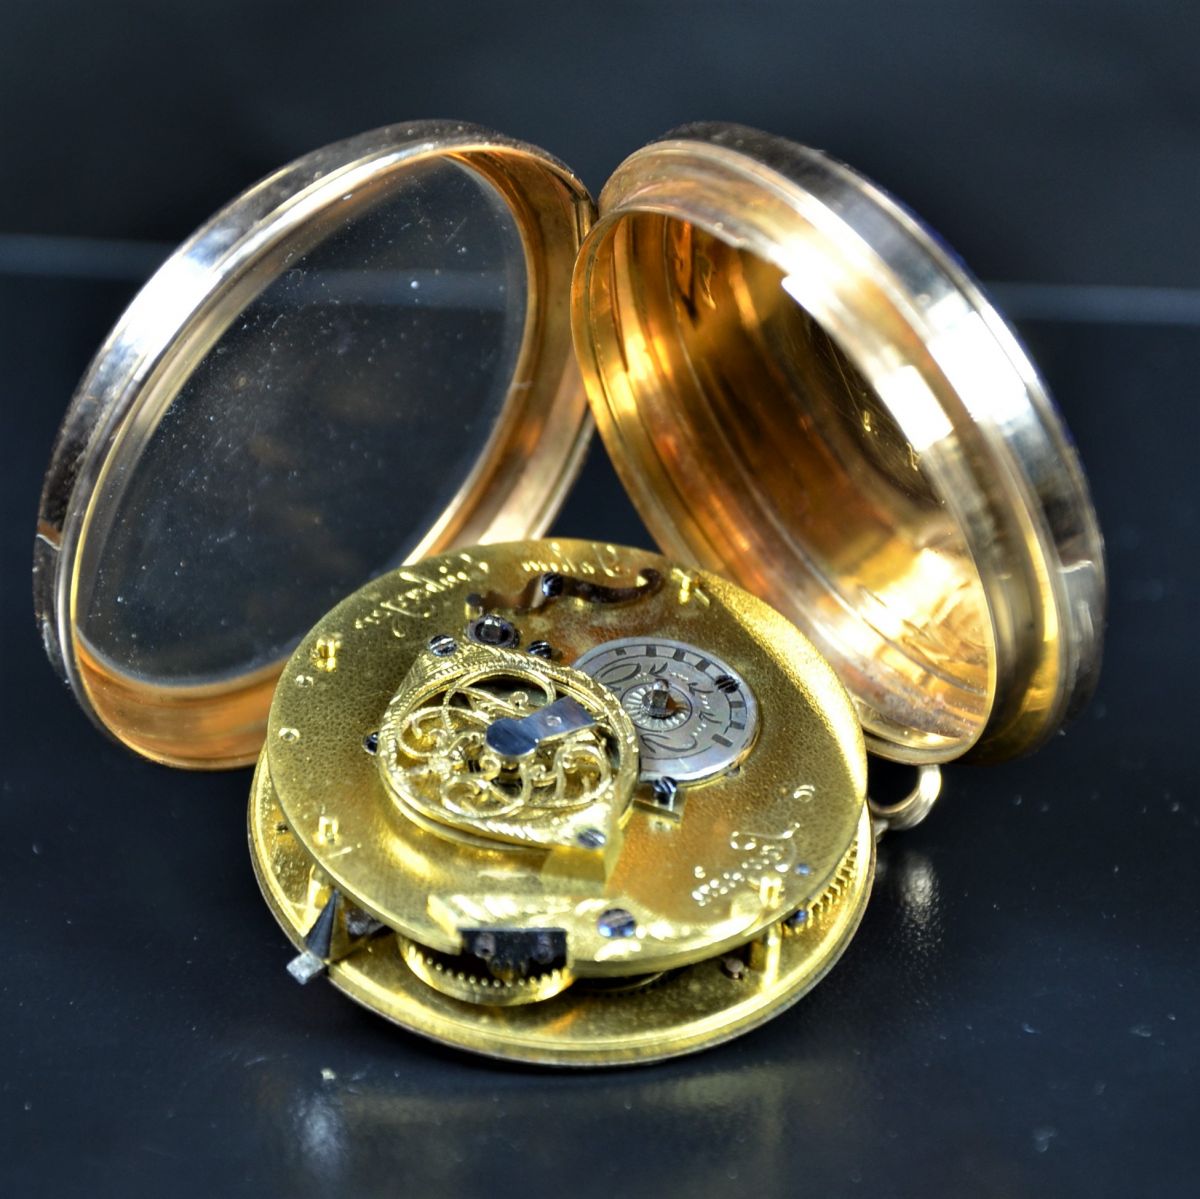  18ct gold pocket watch and Enameled double case. Signed by Johan Einberger, Laufen. Very good...